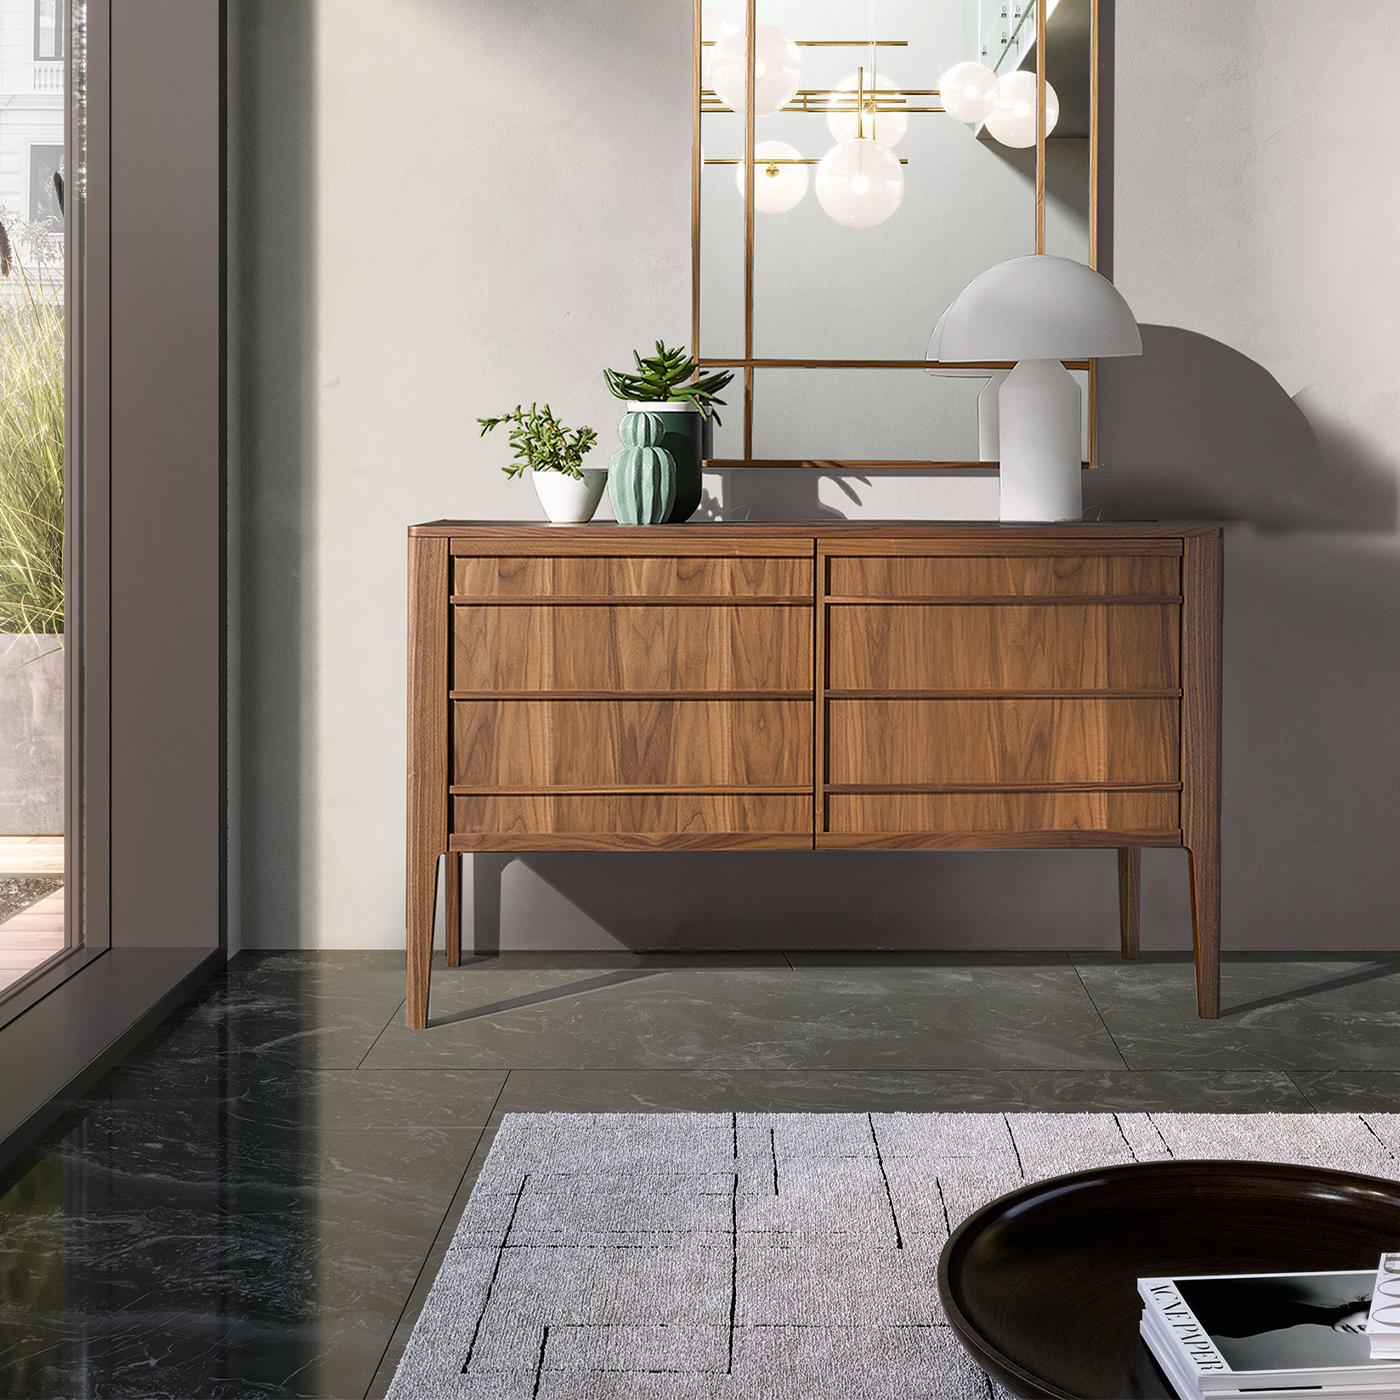 This sideboard features 2 wooden doors and 2 glass shelves with integrated wooden handles in a natural Havana finish.